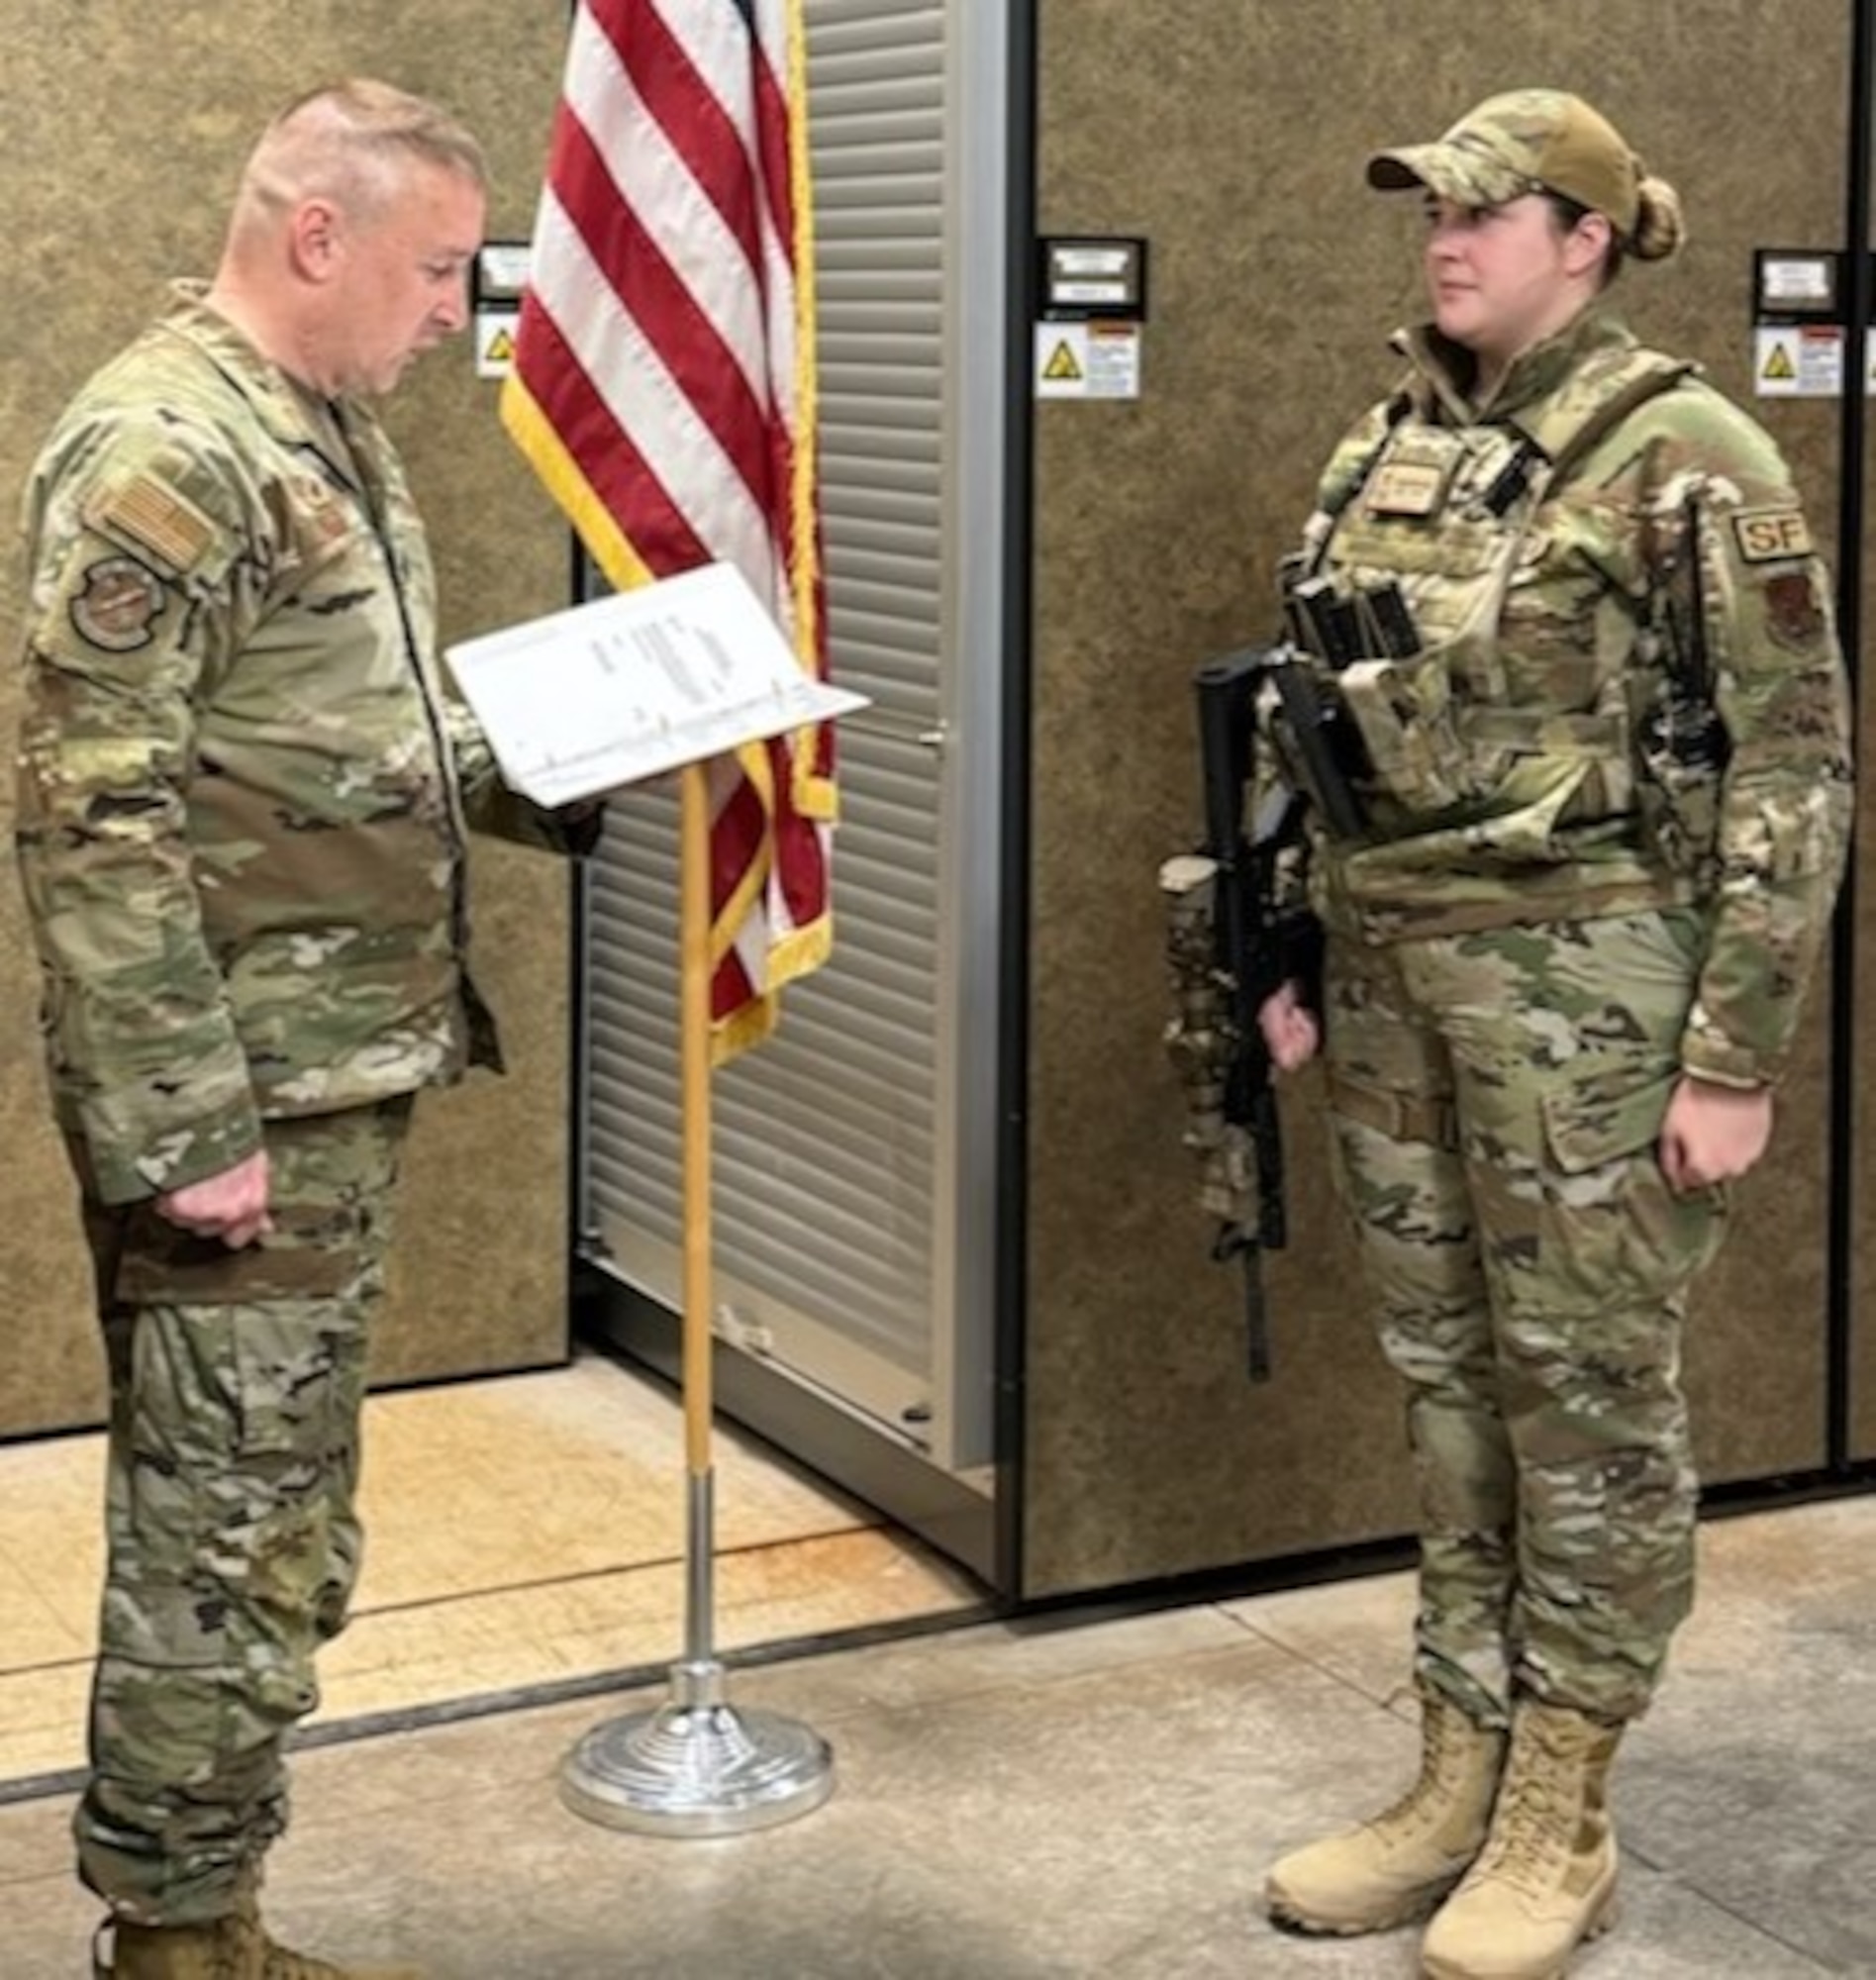 224th ADG Airman promoted on Feb. 7